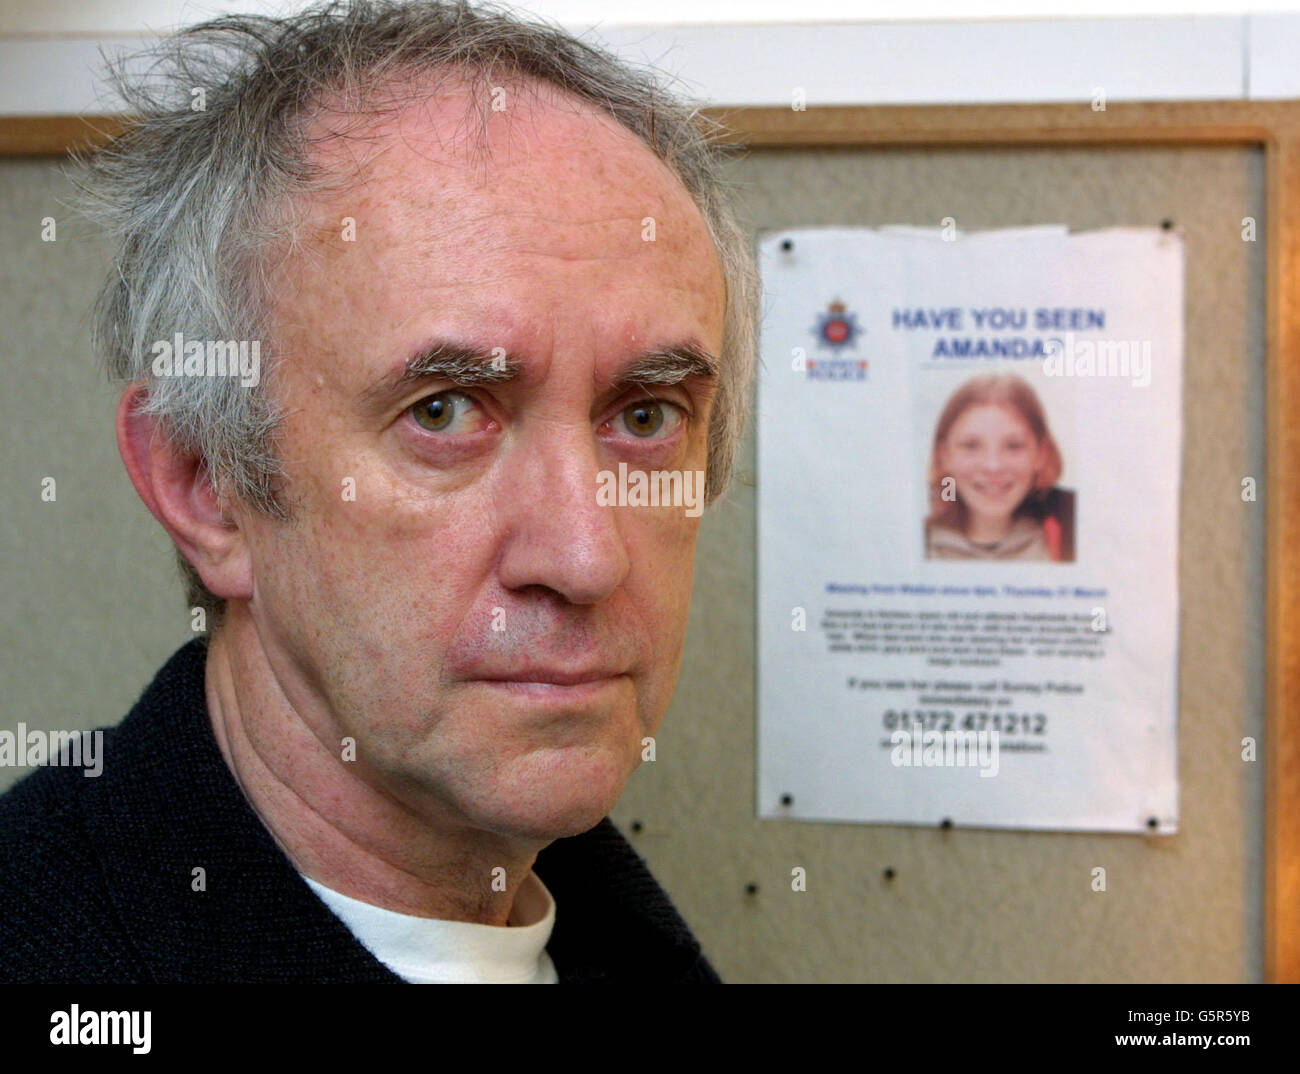 Actor Jonathan Pryce who is playing in the stage play My Fair Lady at the Theatre Royal in Drury Lane, London appeals for more information on missing school girl Amanda Dowler. * The 13-year-old known as Milly made plans with her family to see the West End production before she vanished. Stock Photo